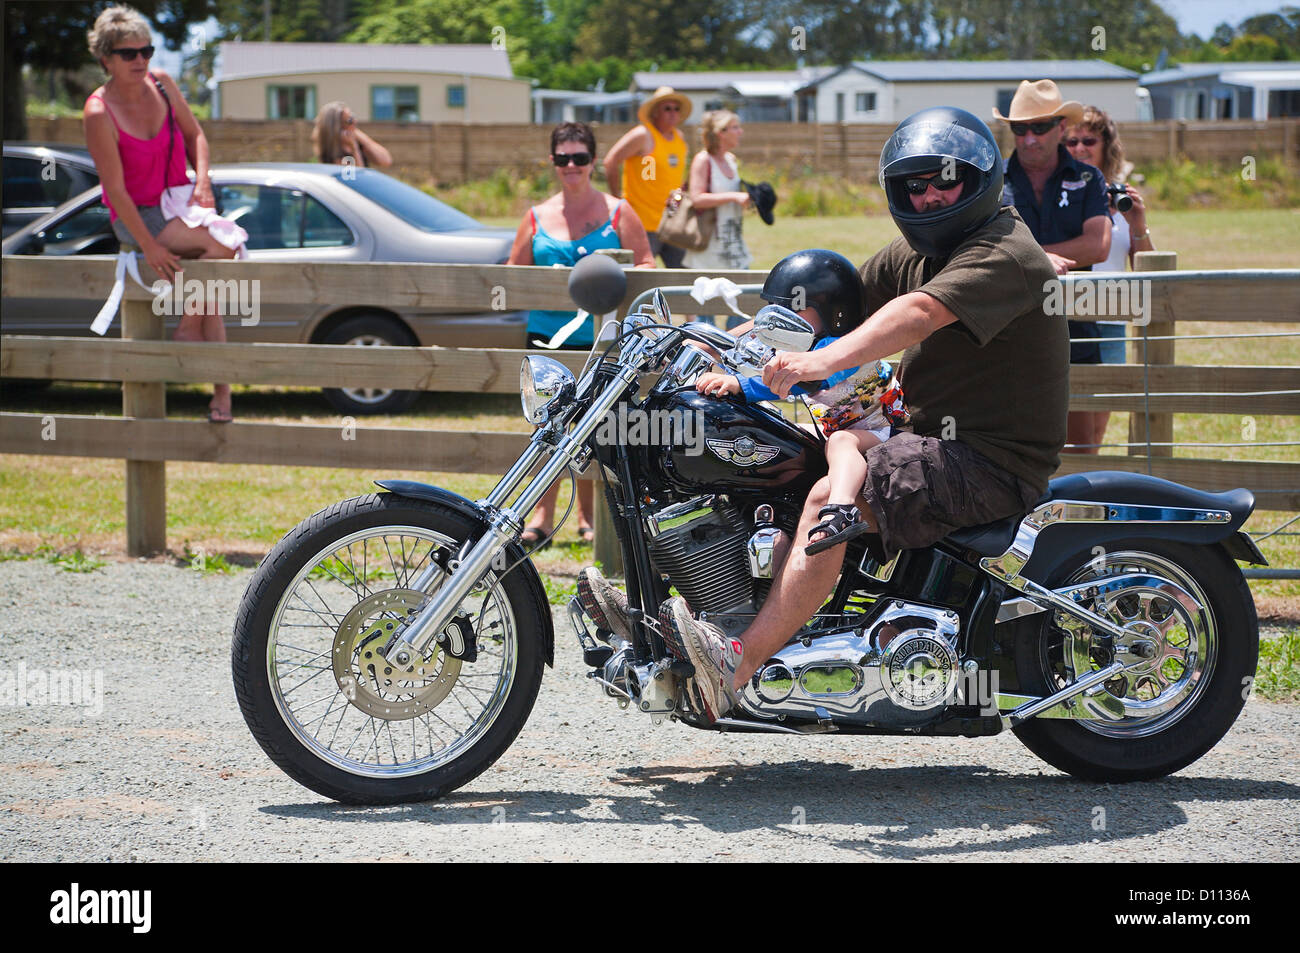 A man and a young child riding a Harley Davidson motorcycle. Motorbikes in Mangawhai, Northland, North Island, New Zealand. Stock Photo